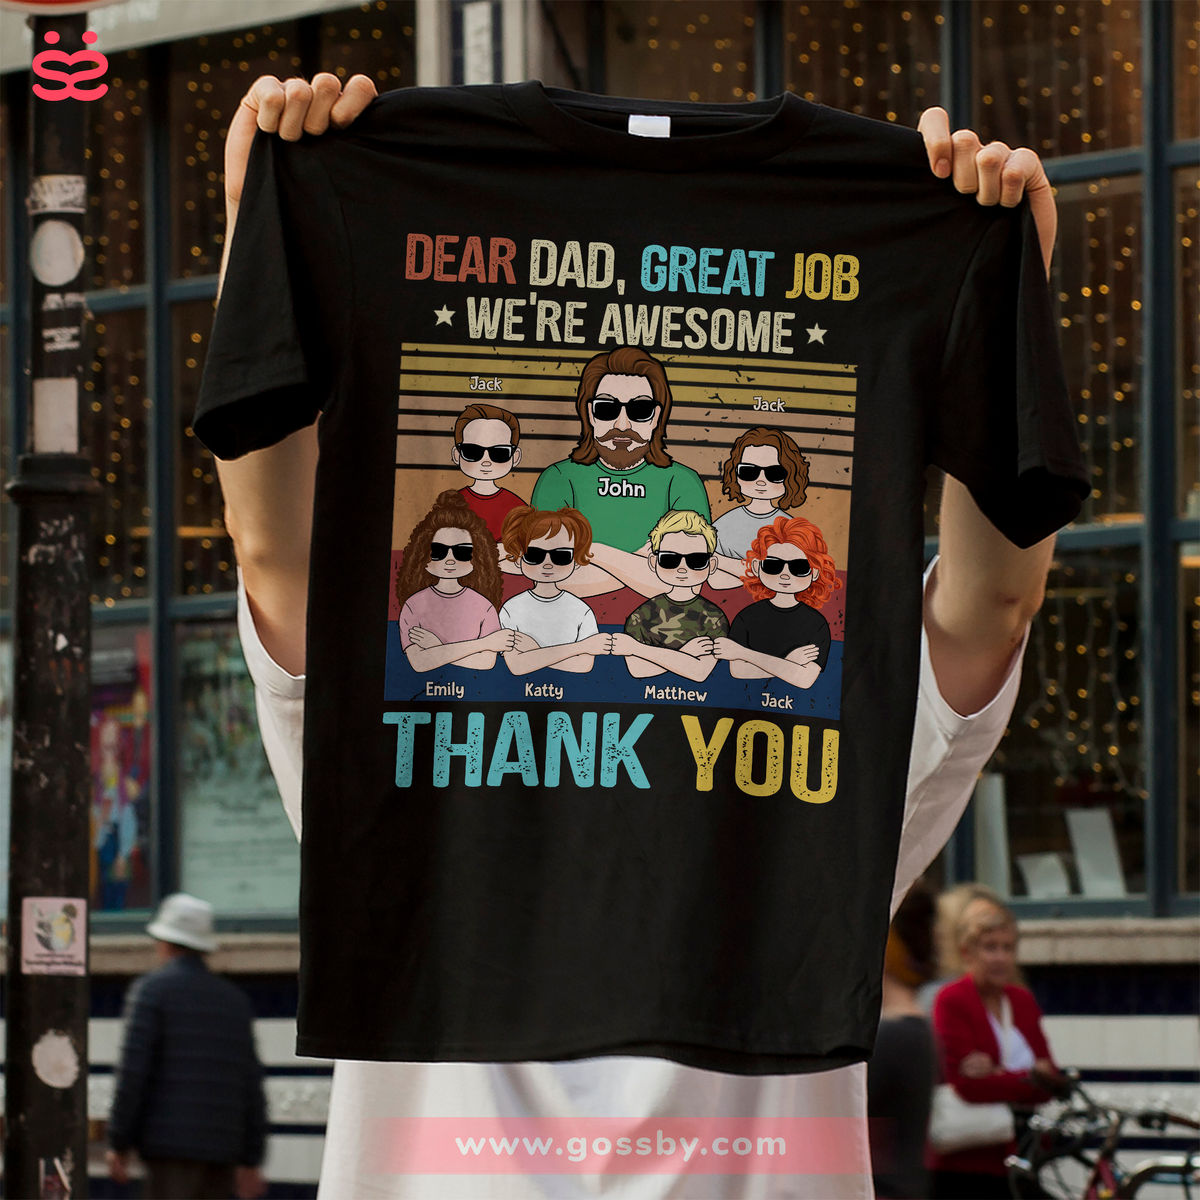 Personalized Shirt - (Up to 6 children) Father & Children - Dear Dad, great job.We’re awesome. Thank you.